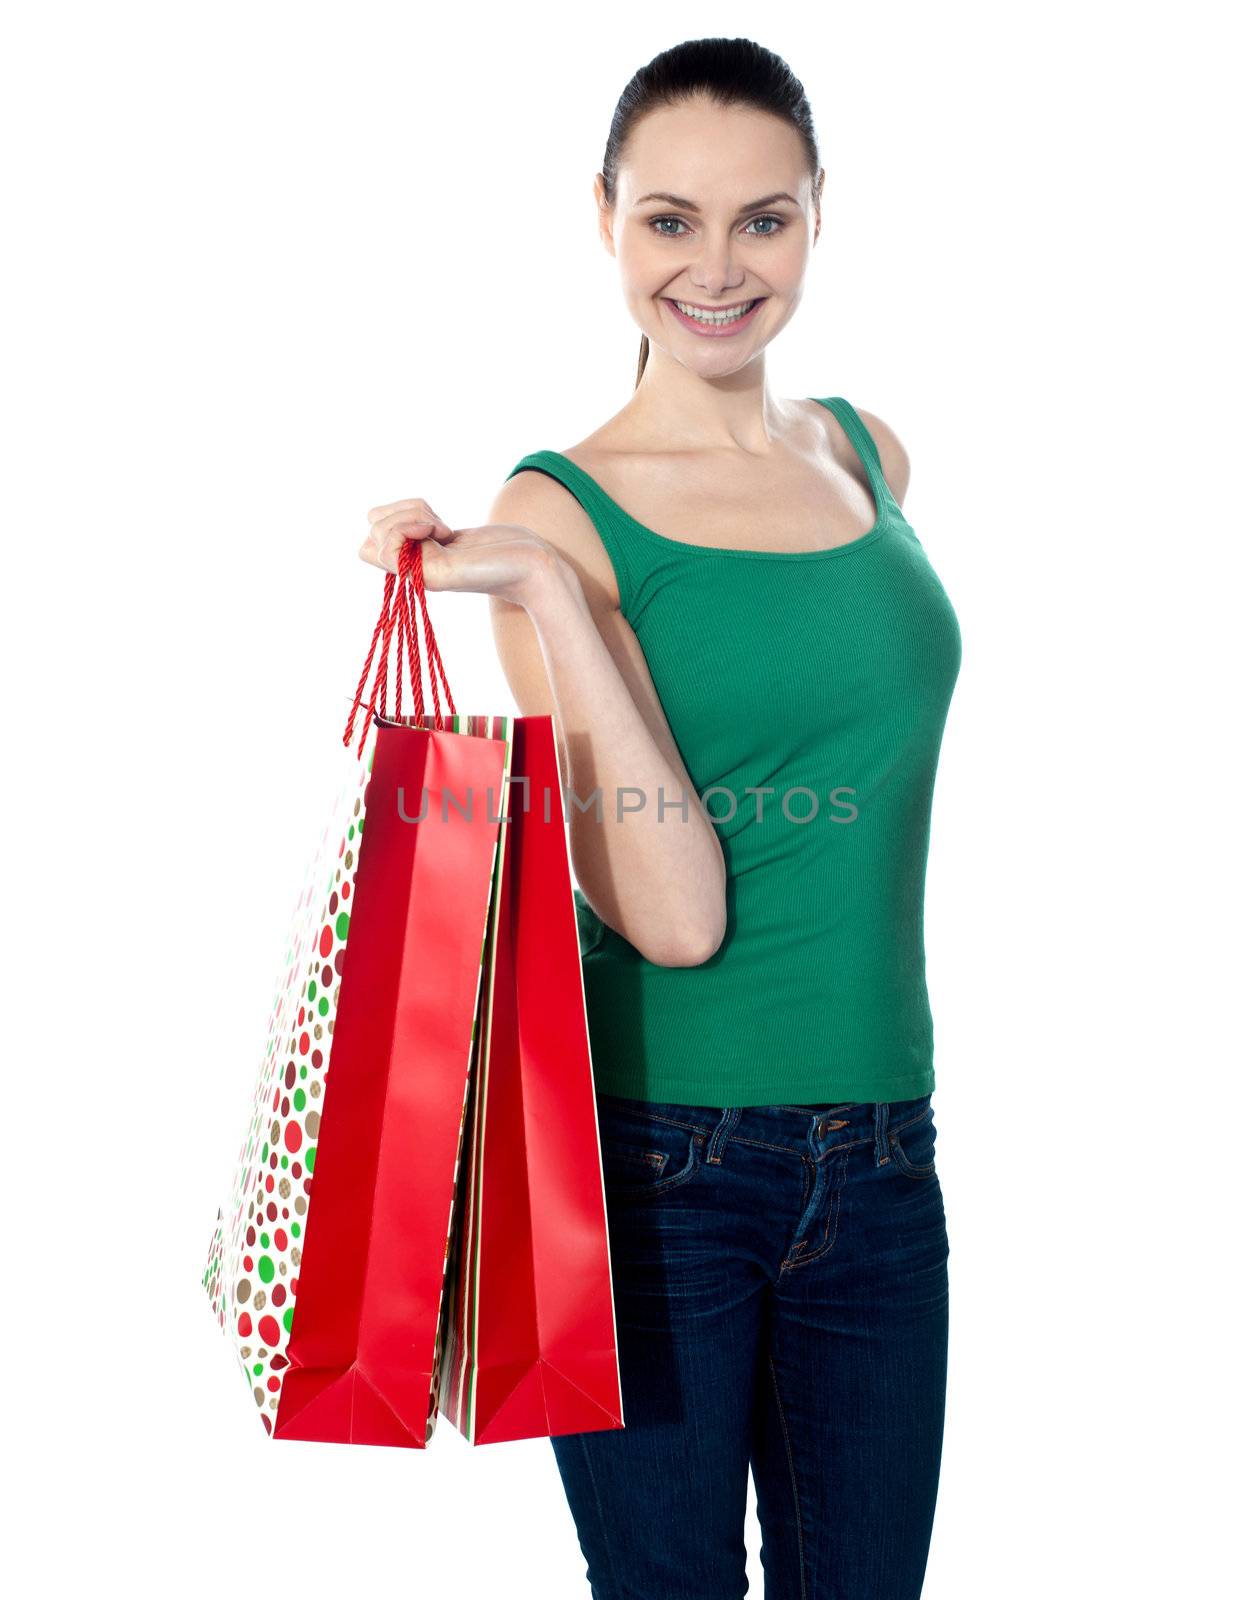 Woman holding shopping bags against white background